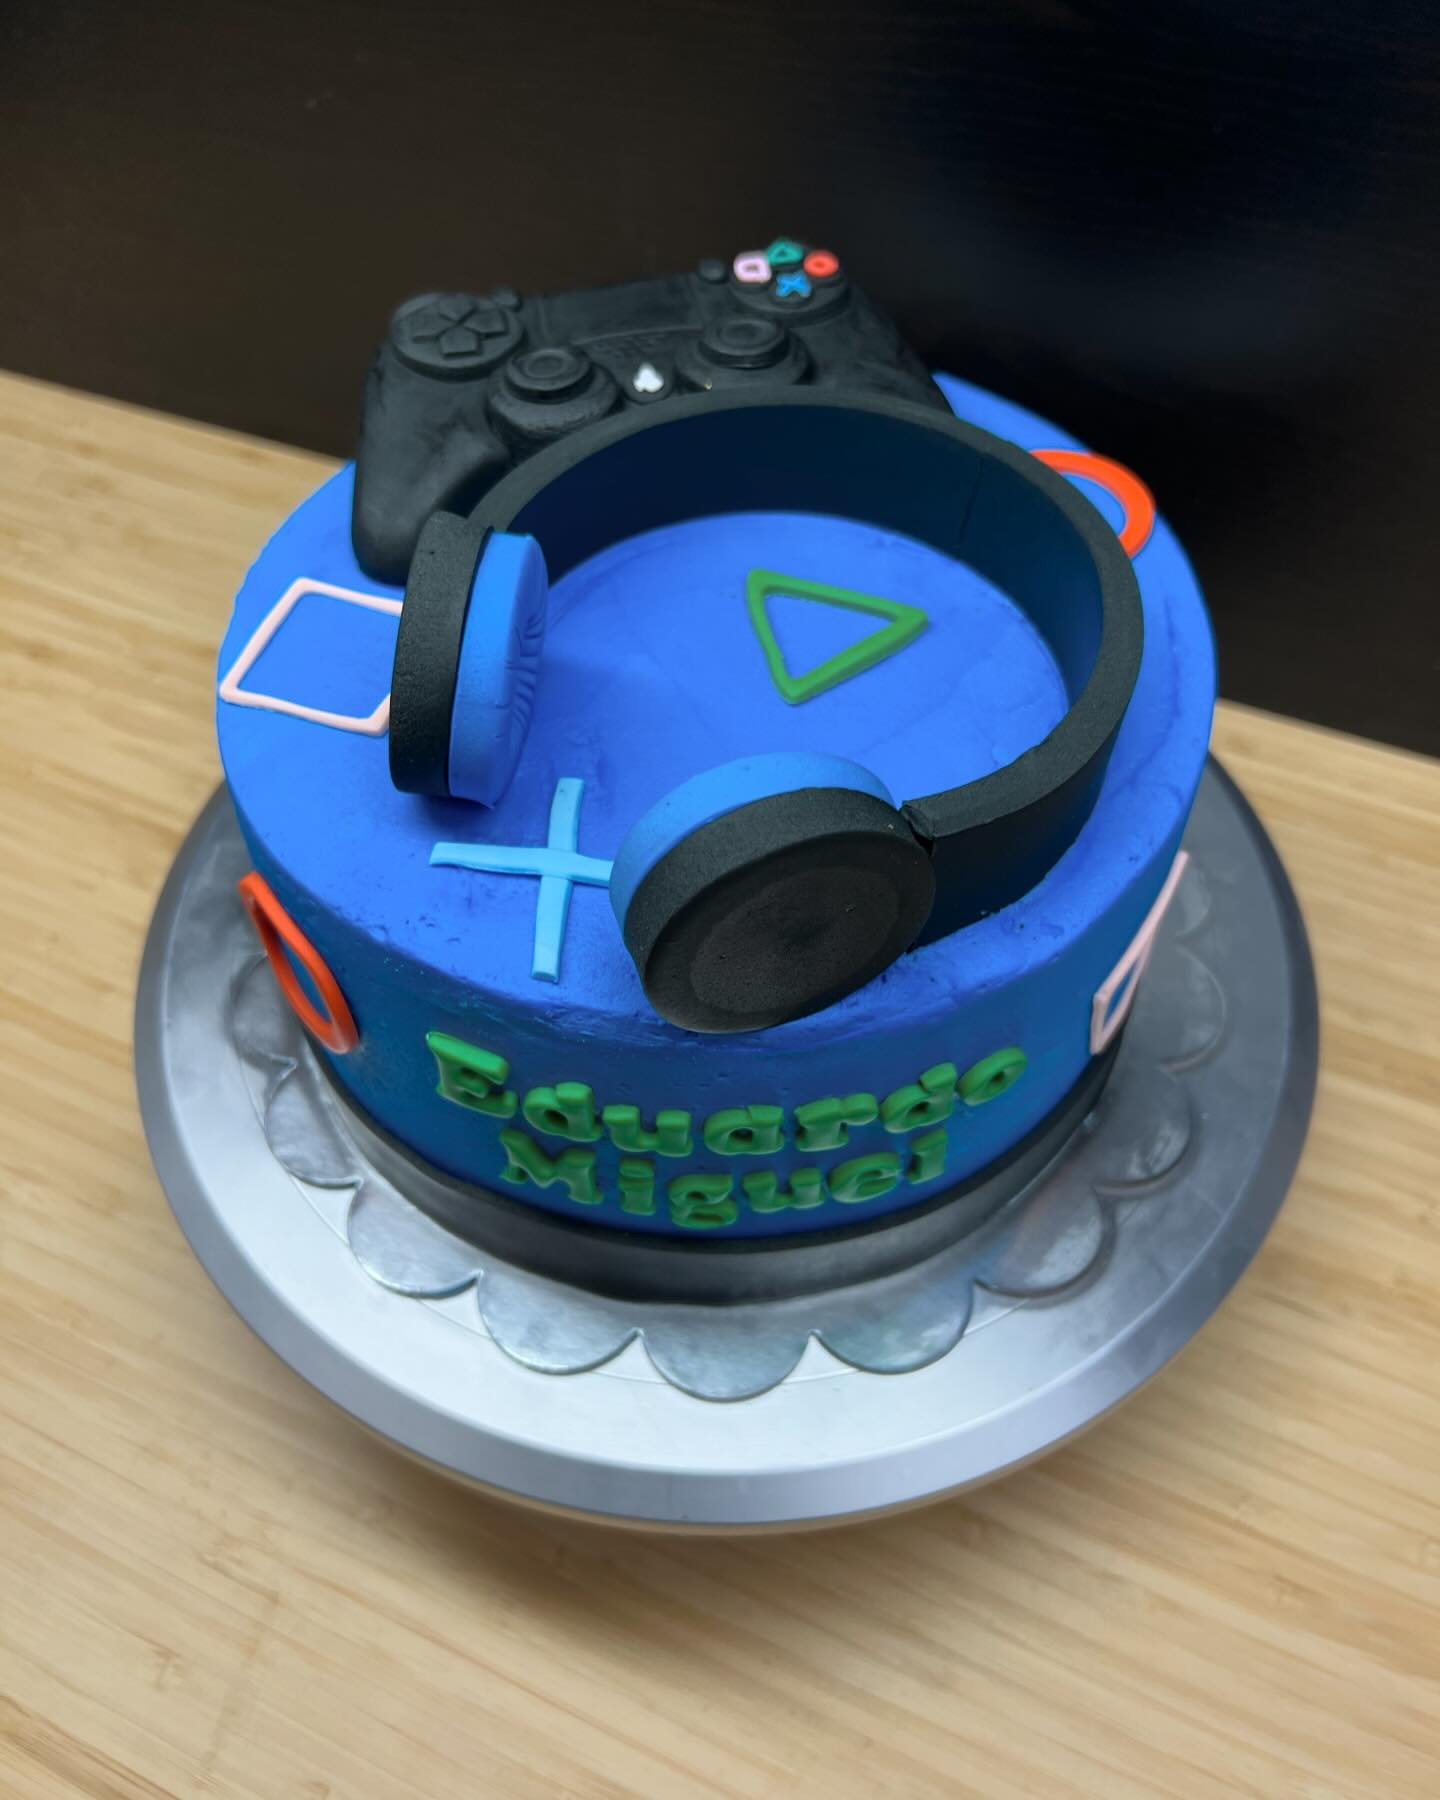 Happy Monday! Check out this awesome gamer cake we did recently! We love making cool cakes for y&rsquo;all 🎮👾🎂 #johnsonvillecakes #wacotexas #wacotx #wacocakes #mcgregortexas #mcgregortx #gamercake #birthdaycakesofwaco #birthdaycakesofmcgregor #vi